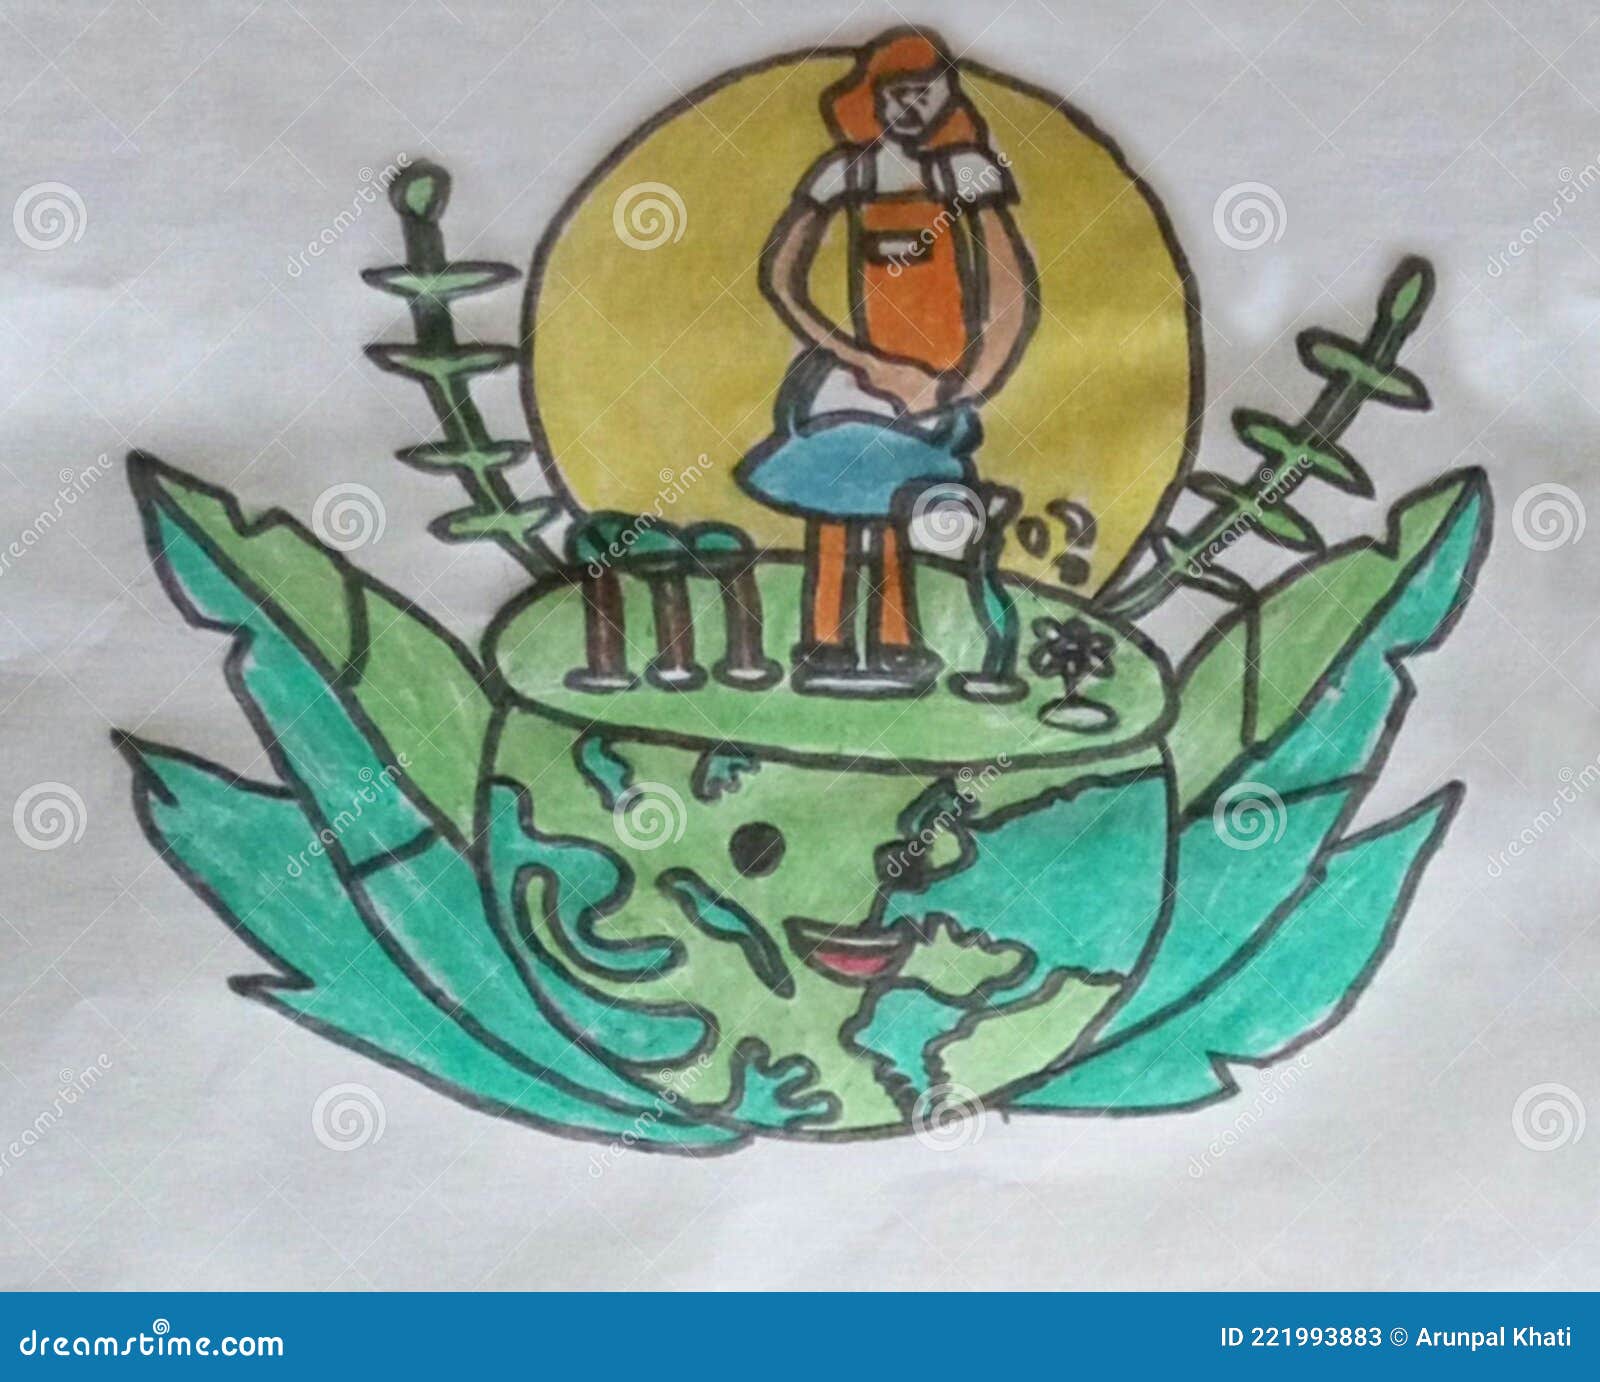 World Environment Day Drawing - Kids Drawing Competition-saigonsouth.com.vn